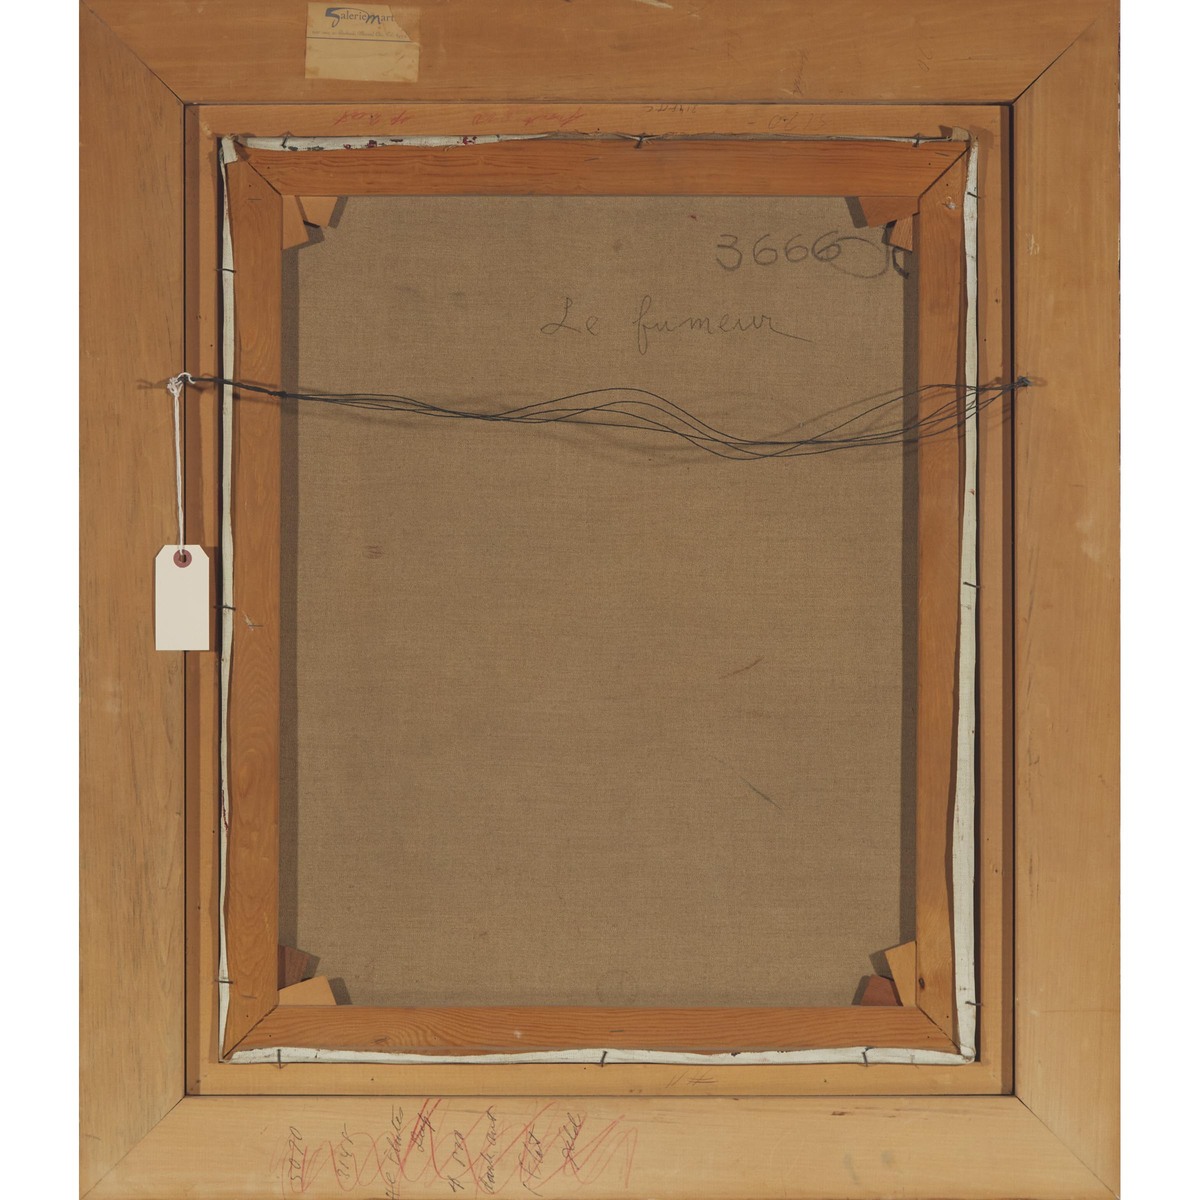 Louis Toffoli (1907-1999), LE FUMEUR, signed lower right; titled verso, 28 x 23.25 in — 71.1 x 59.1 - Image 4 of 6